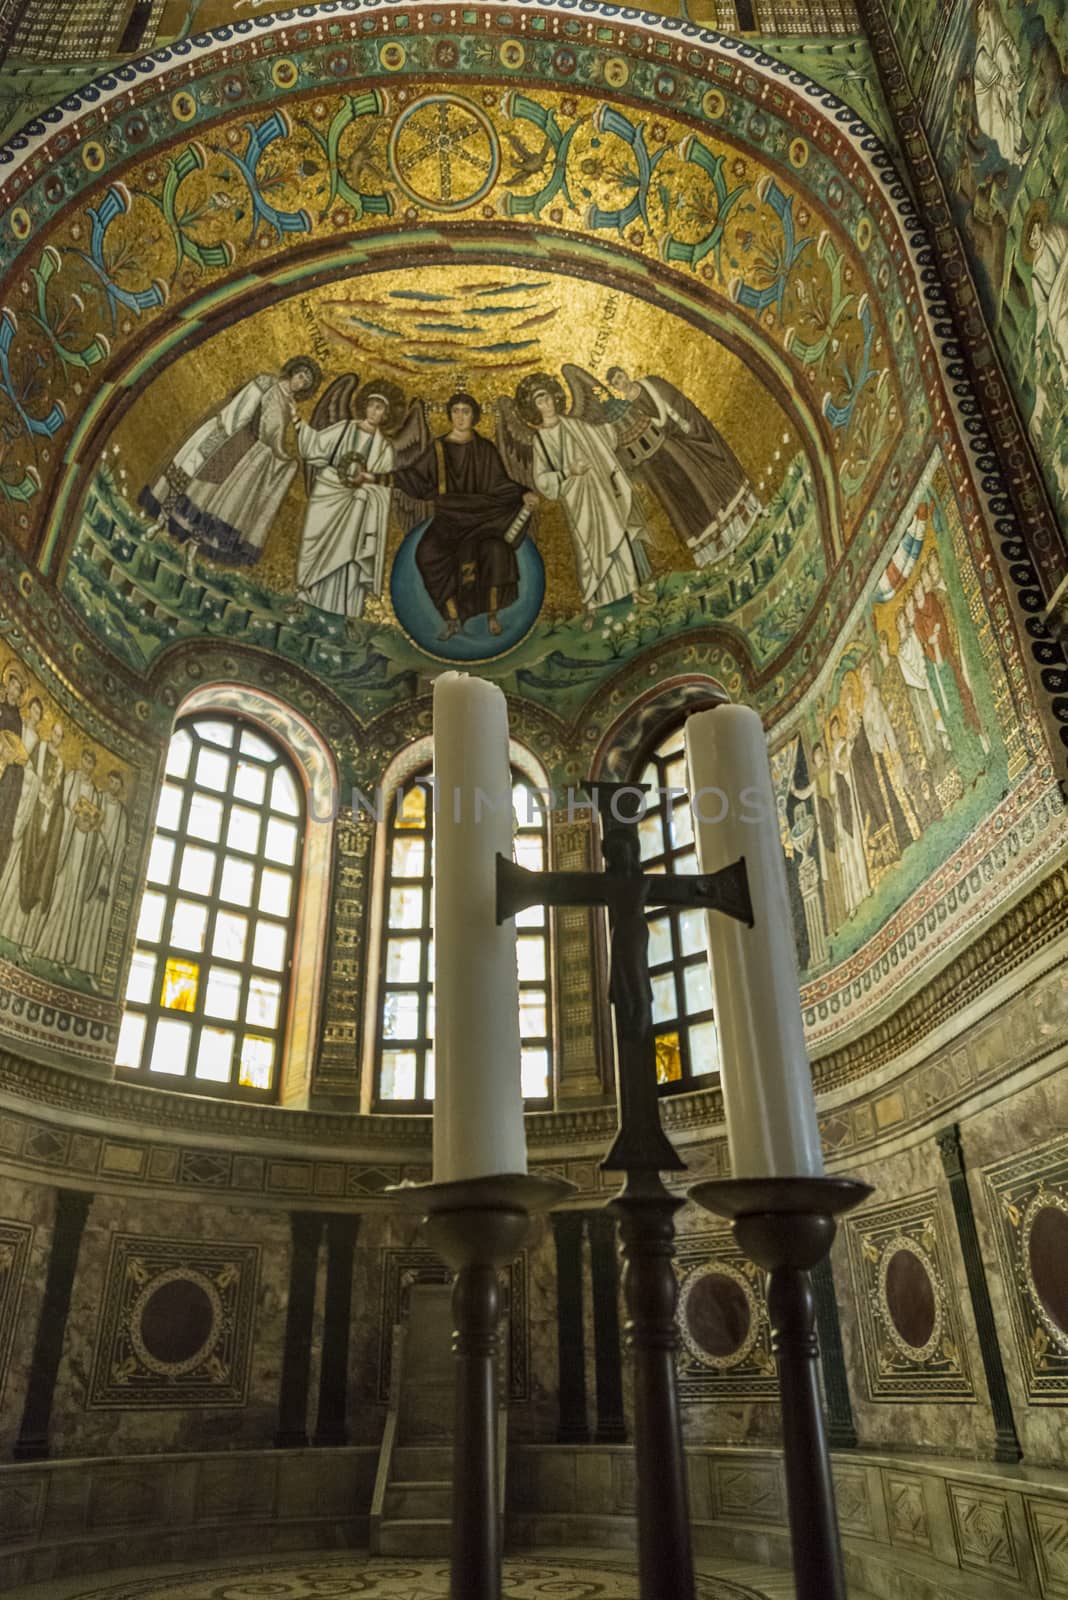 mosaic inside the famous Basilica di San Vitale, one of the most important examples of early Christian Byzantine art in western Europe, in Ravenna, region of Emilia-Romagna, Italy